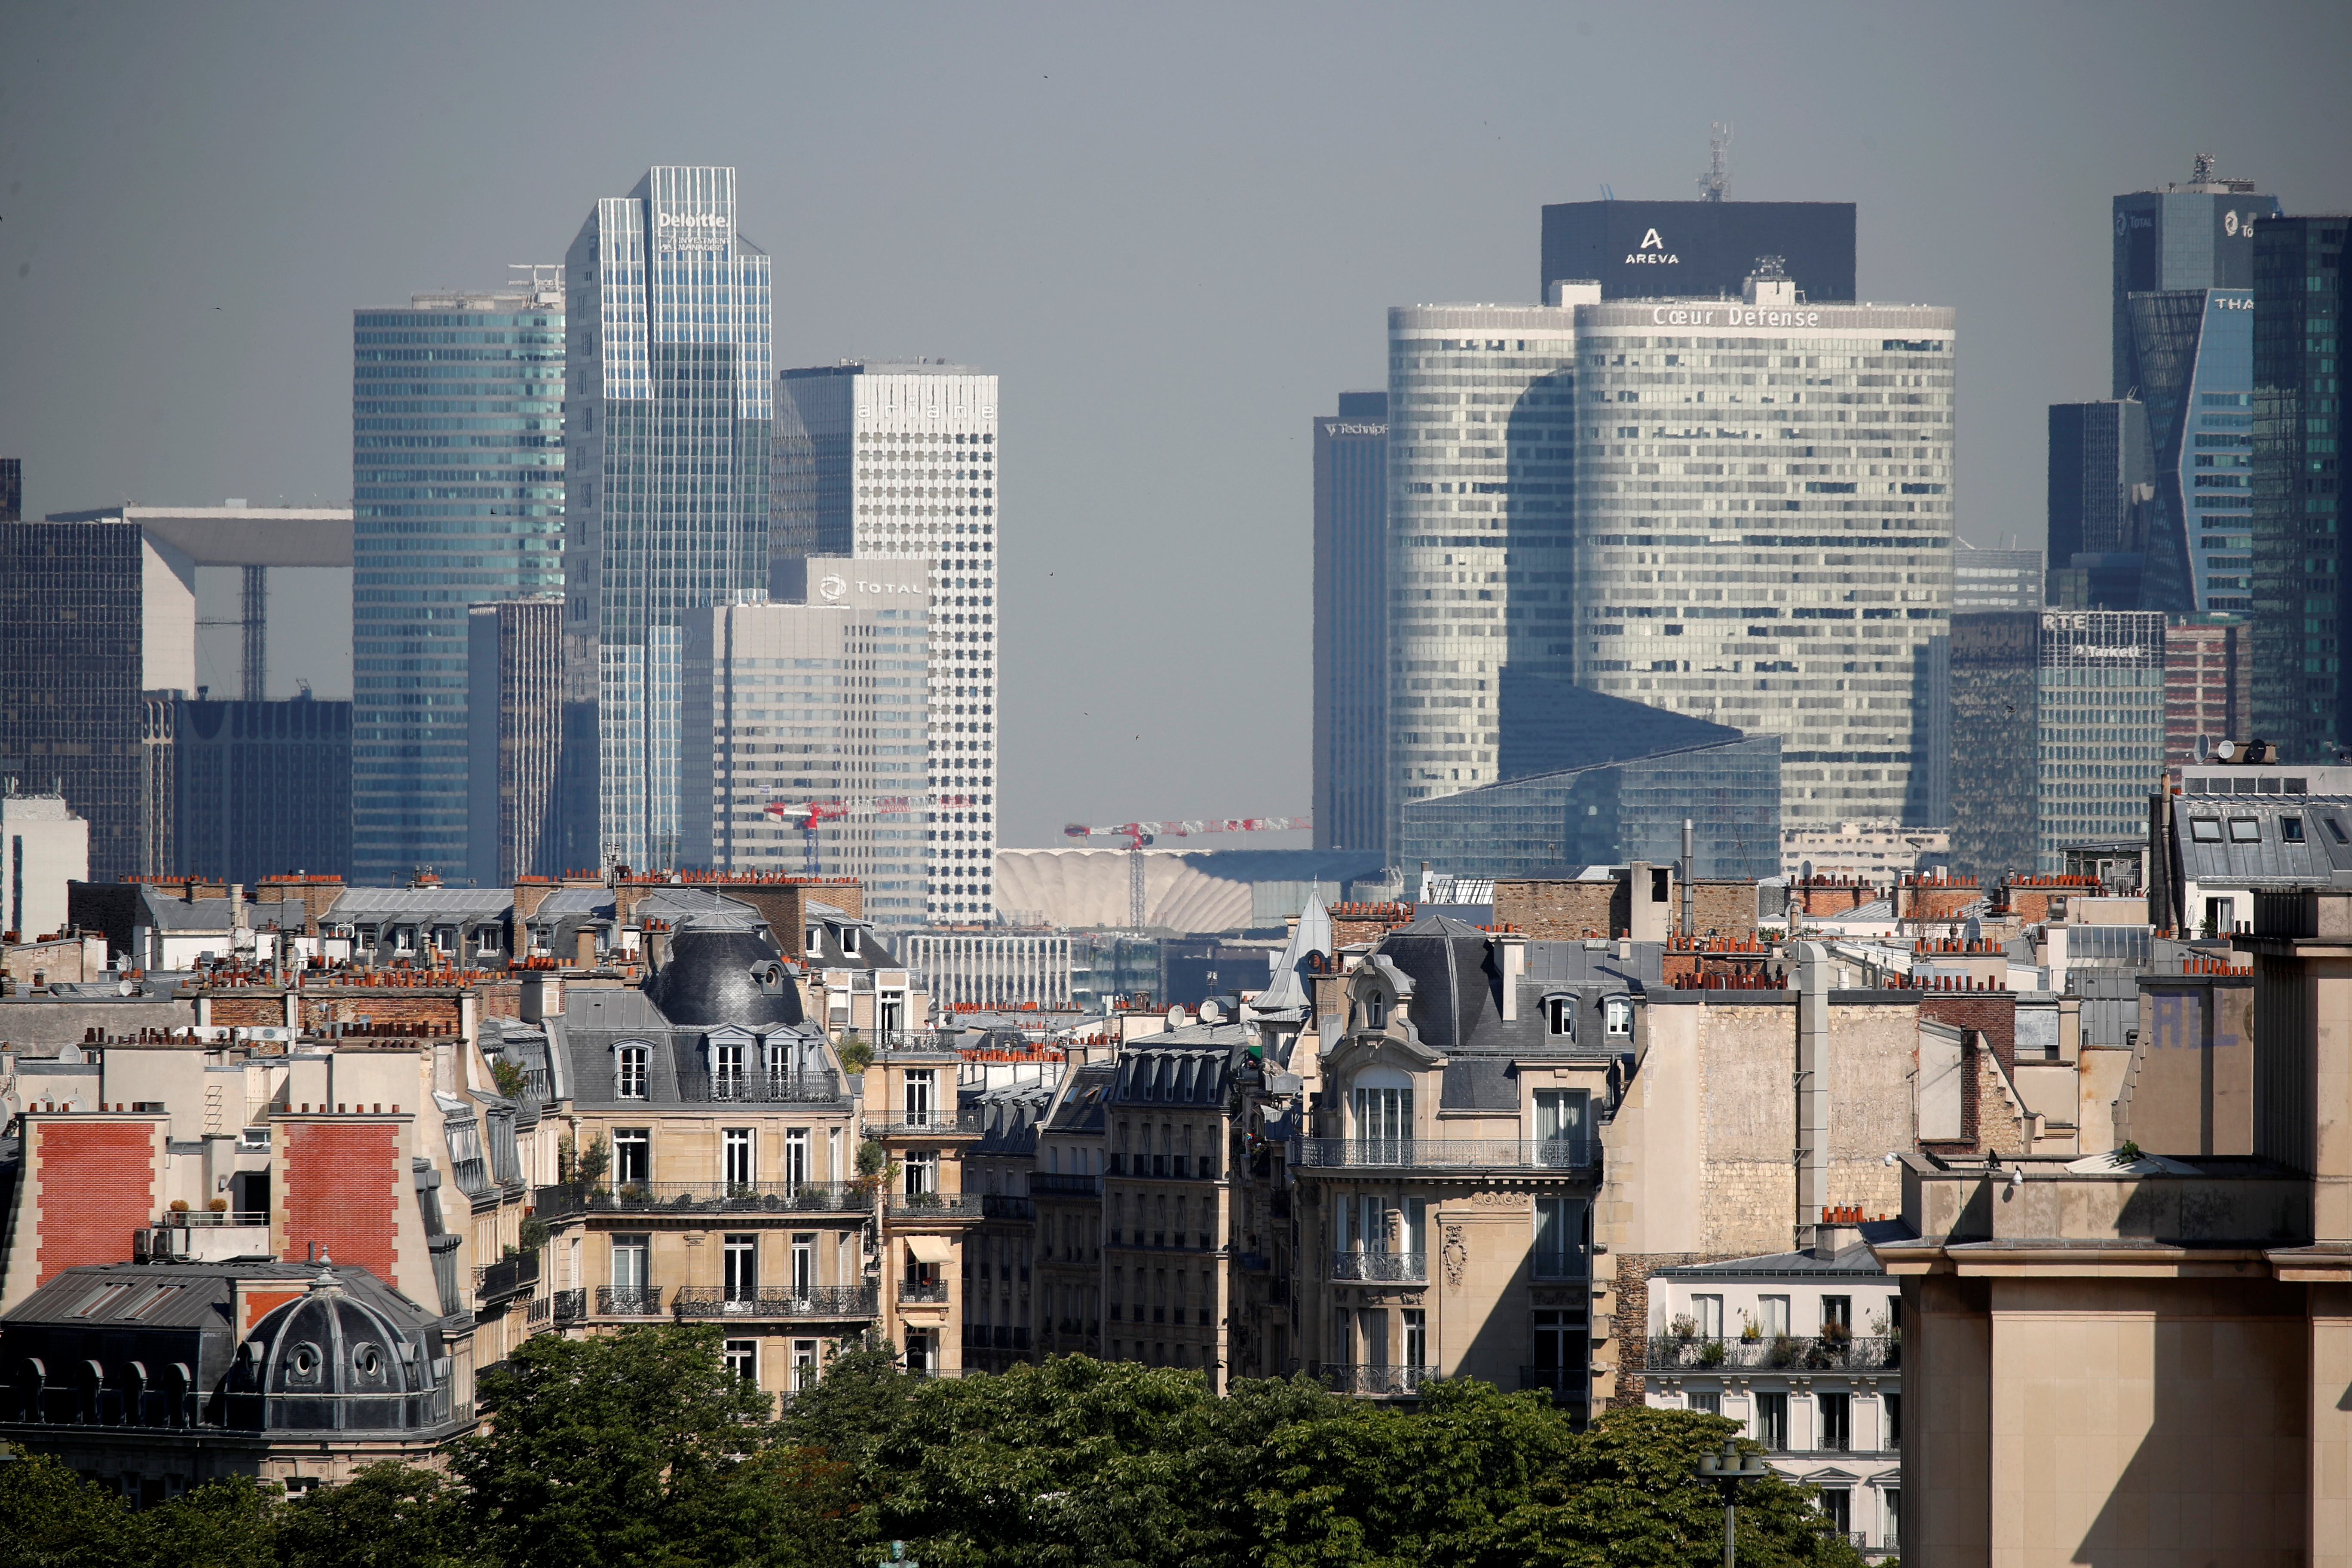 The skyline of La Defense business district seen from Paris